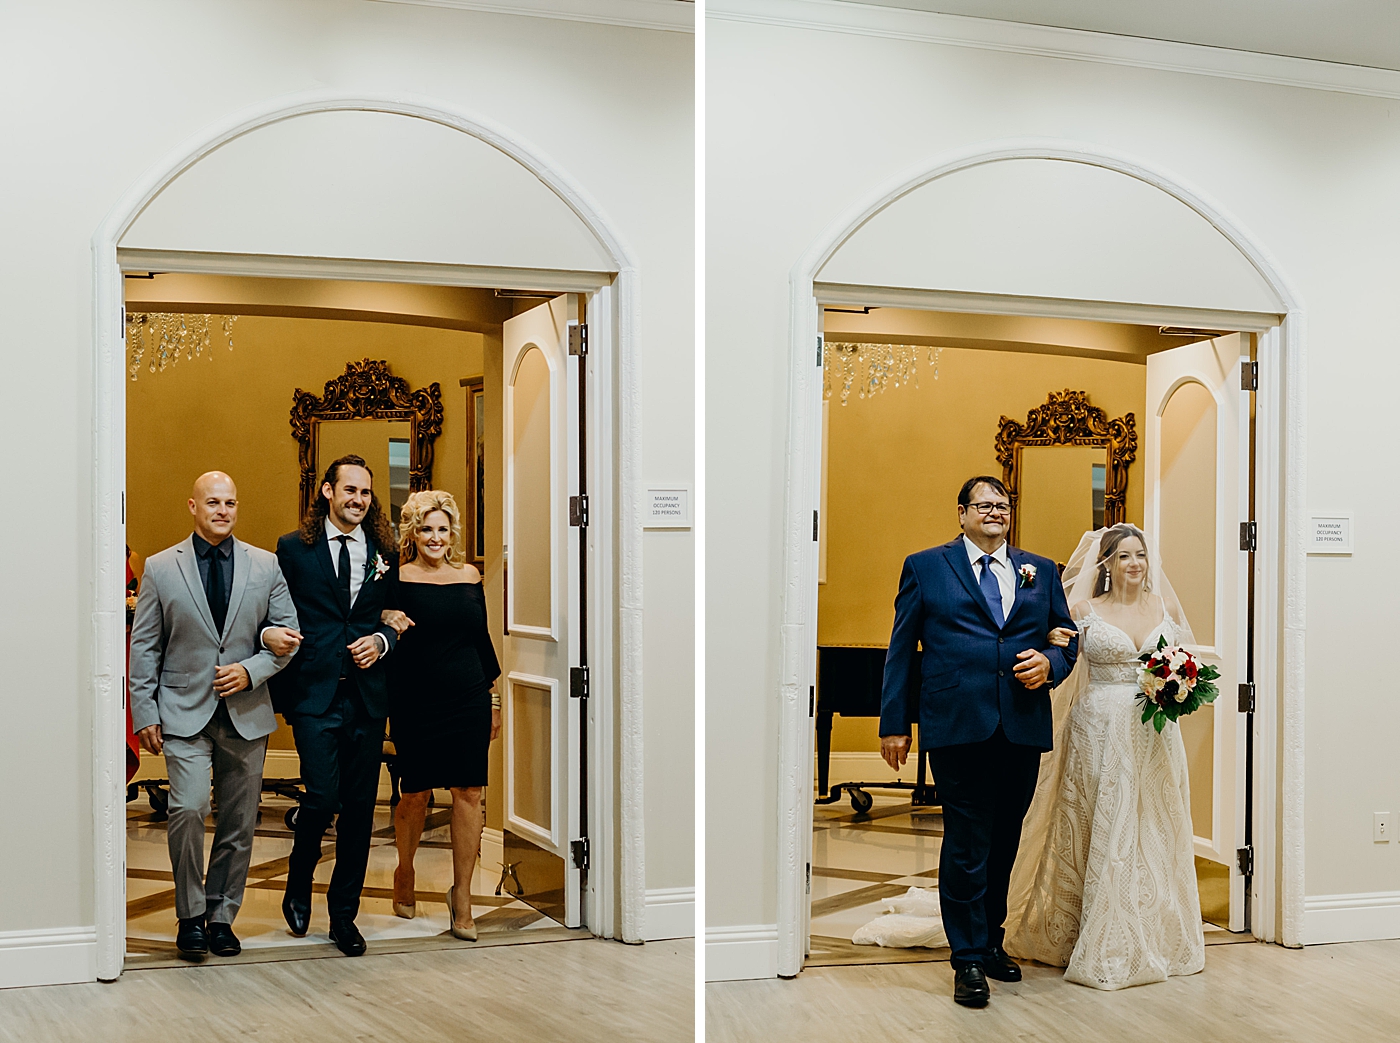 Ceremony Groom entering with parents and Bride entering with Father Benvenuto Restaurant Wedding Photography captured by South Florida Wedding Photographer Maggie Alvarez Photography